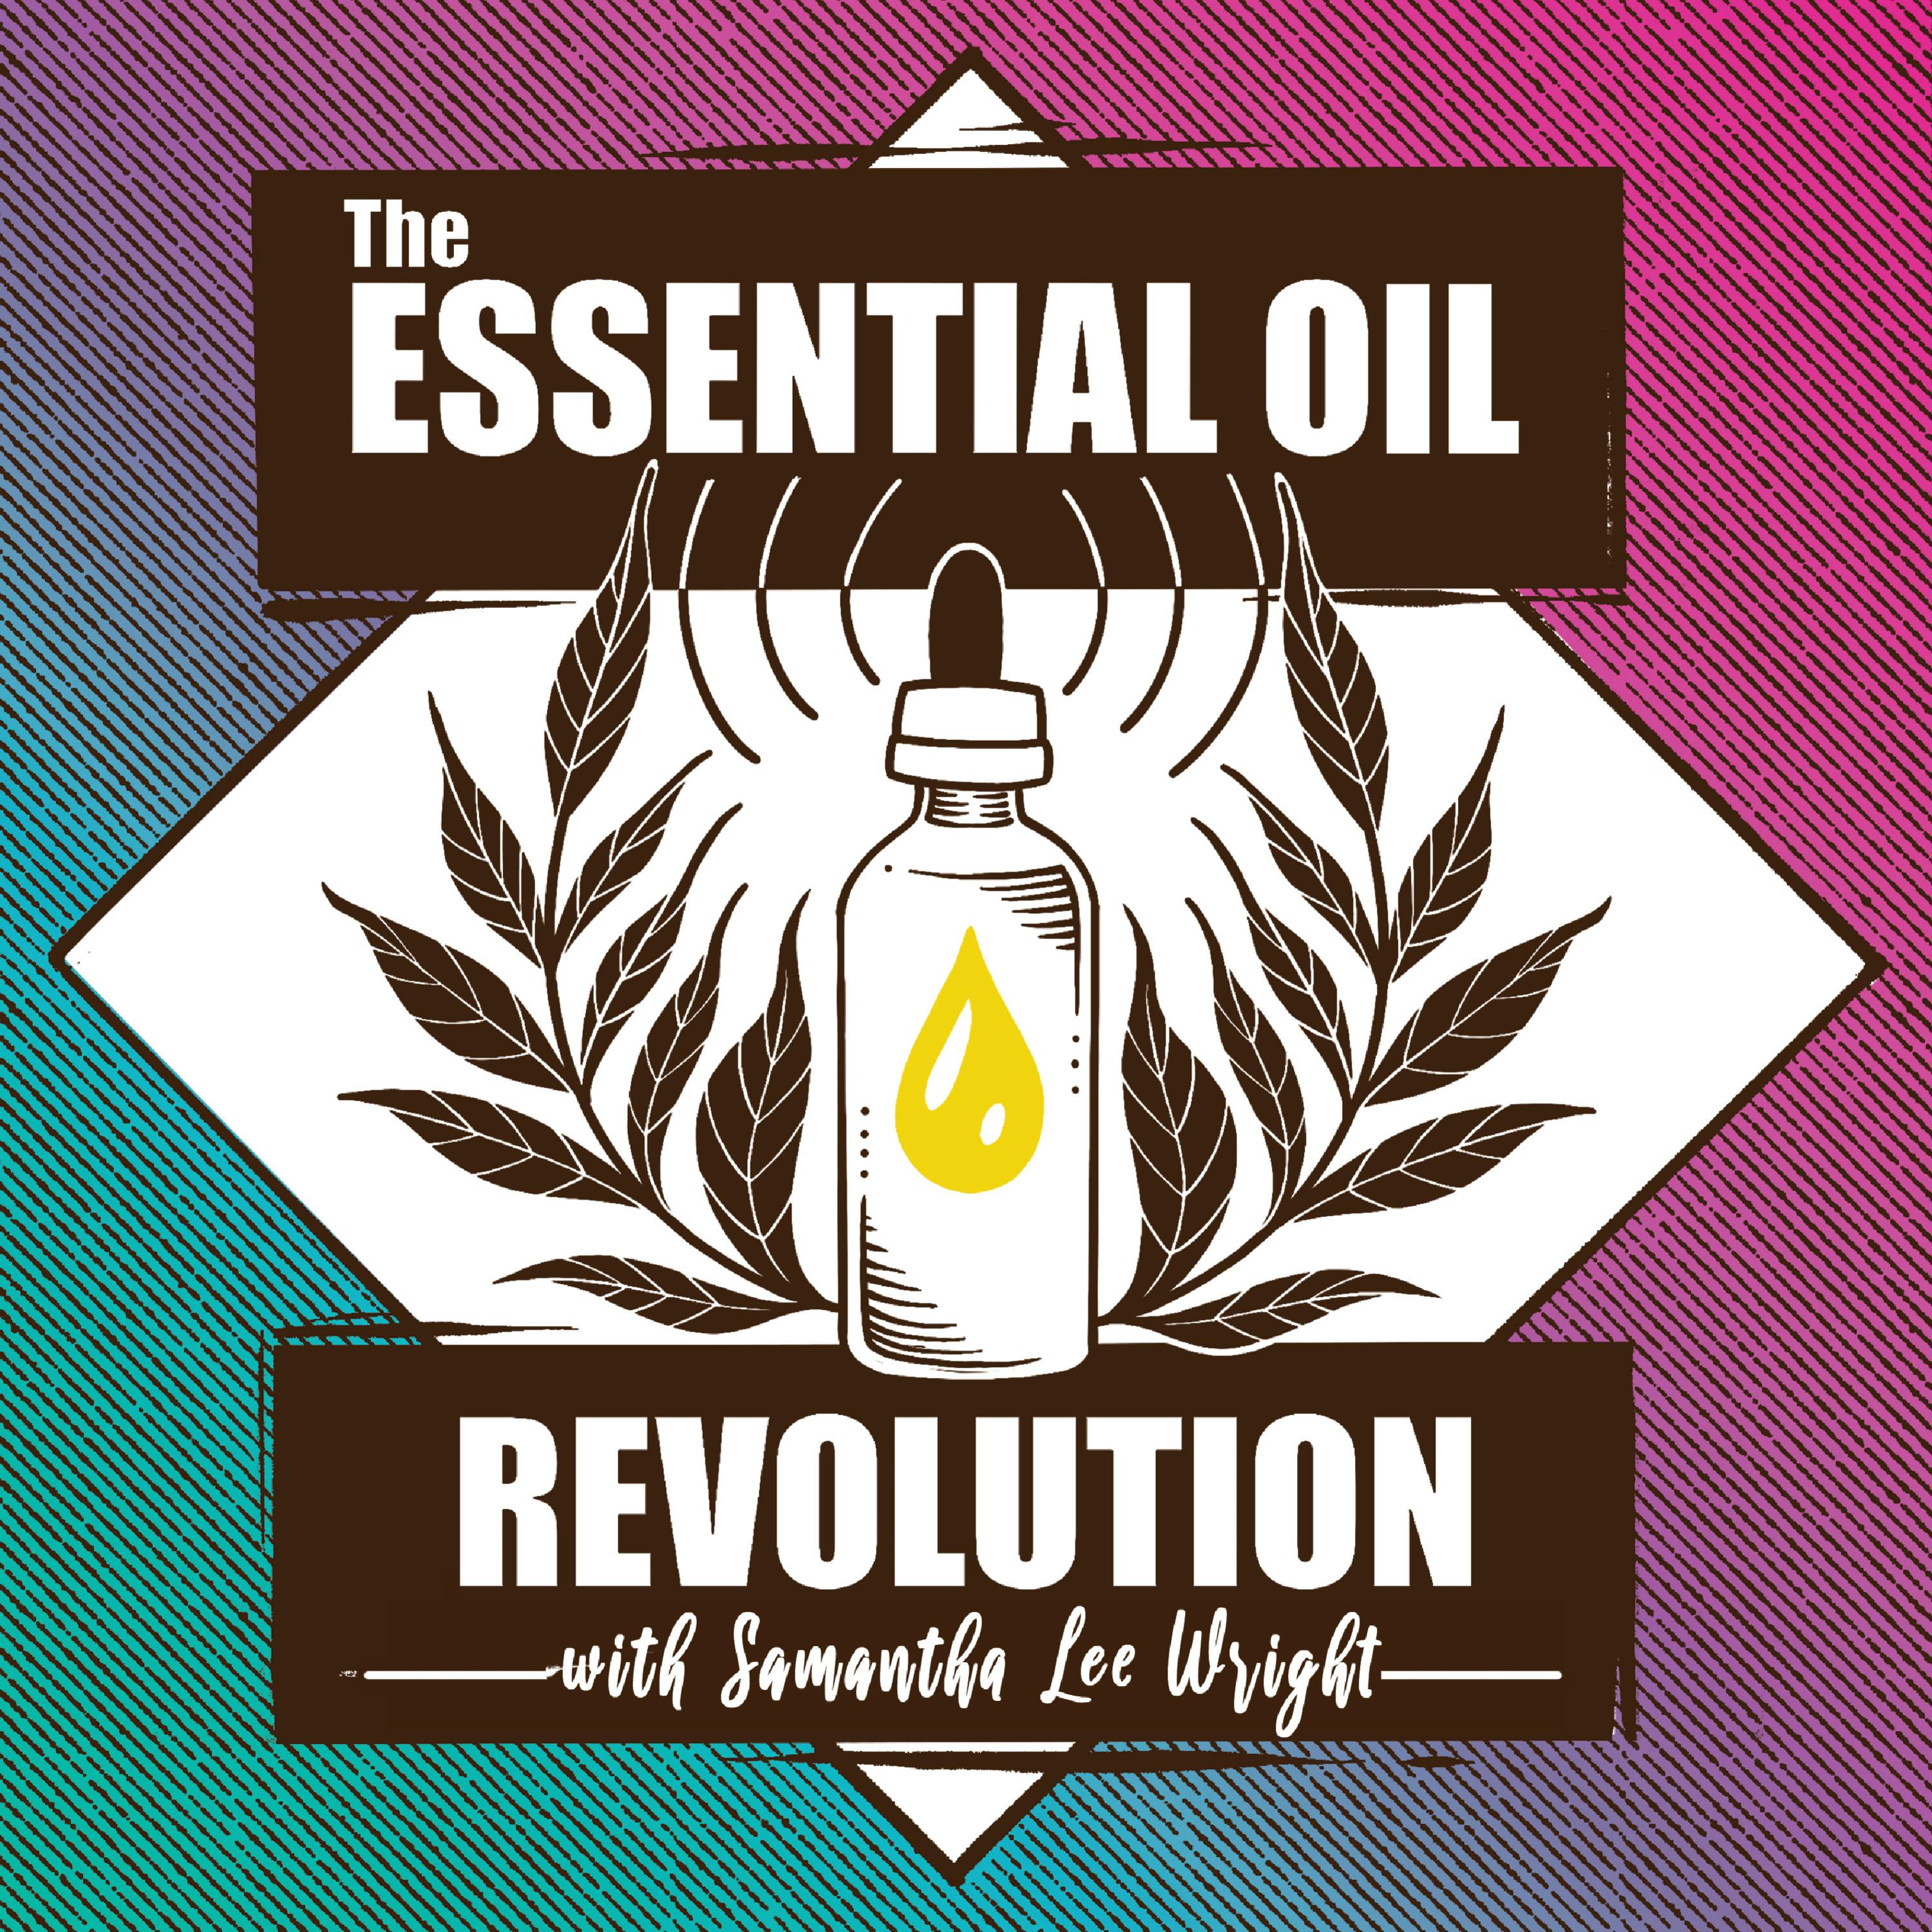 335: Special Needs Kids and How Oils Can Help w/ Jennifer Lansink